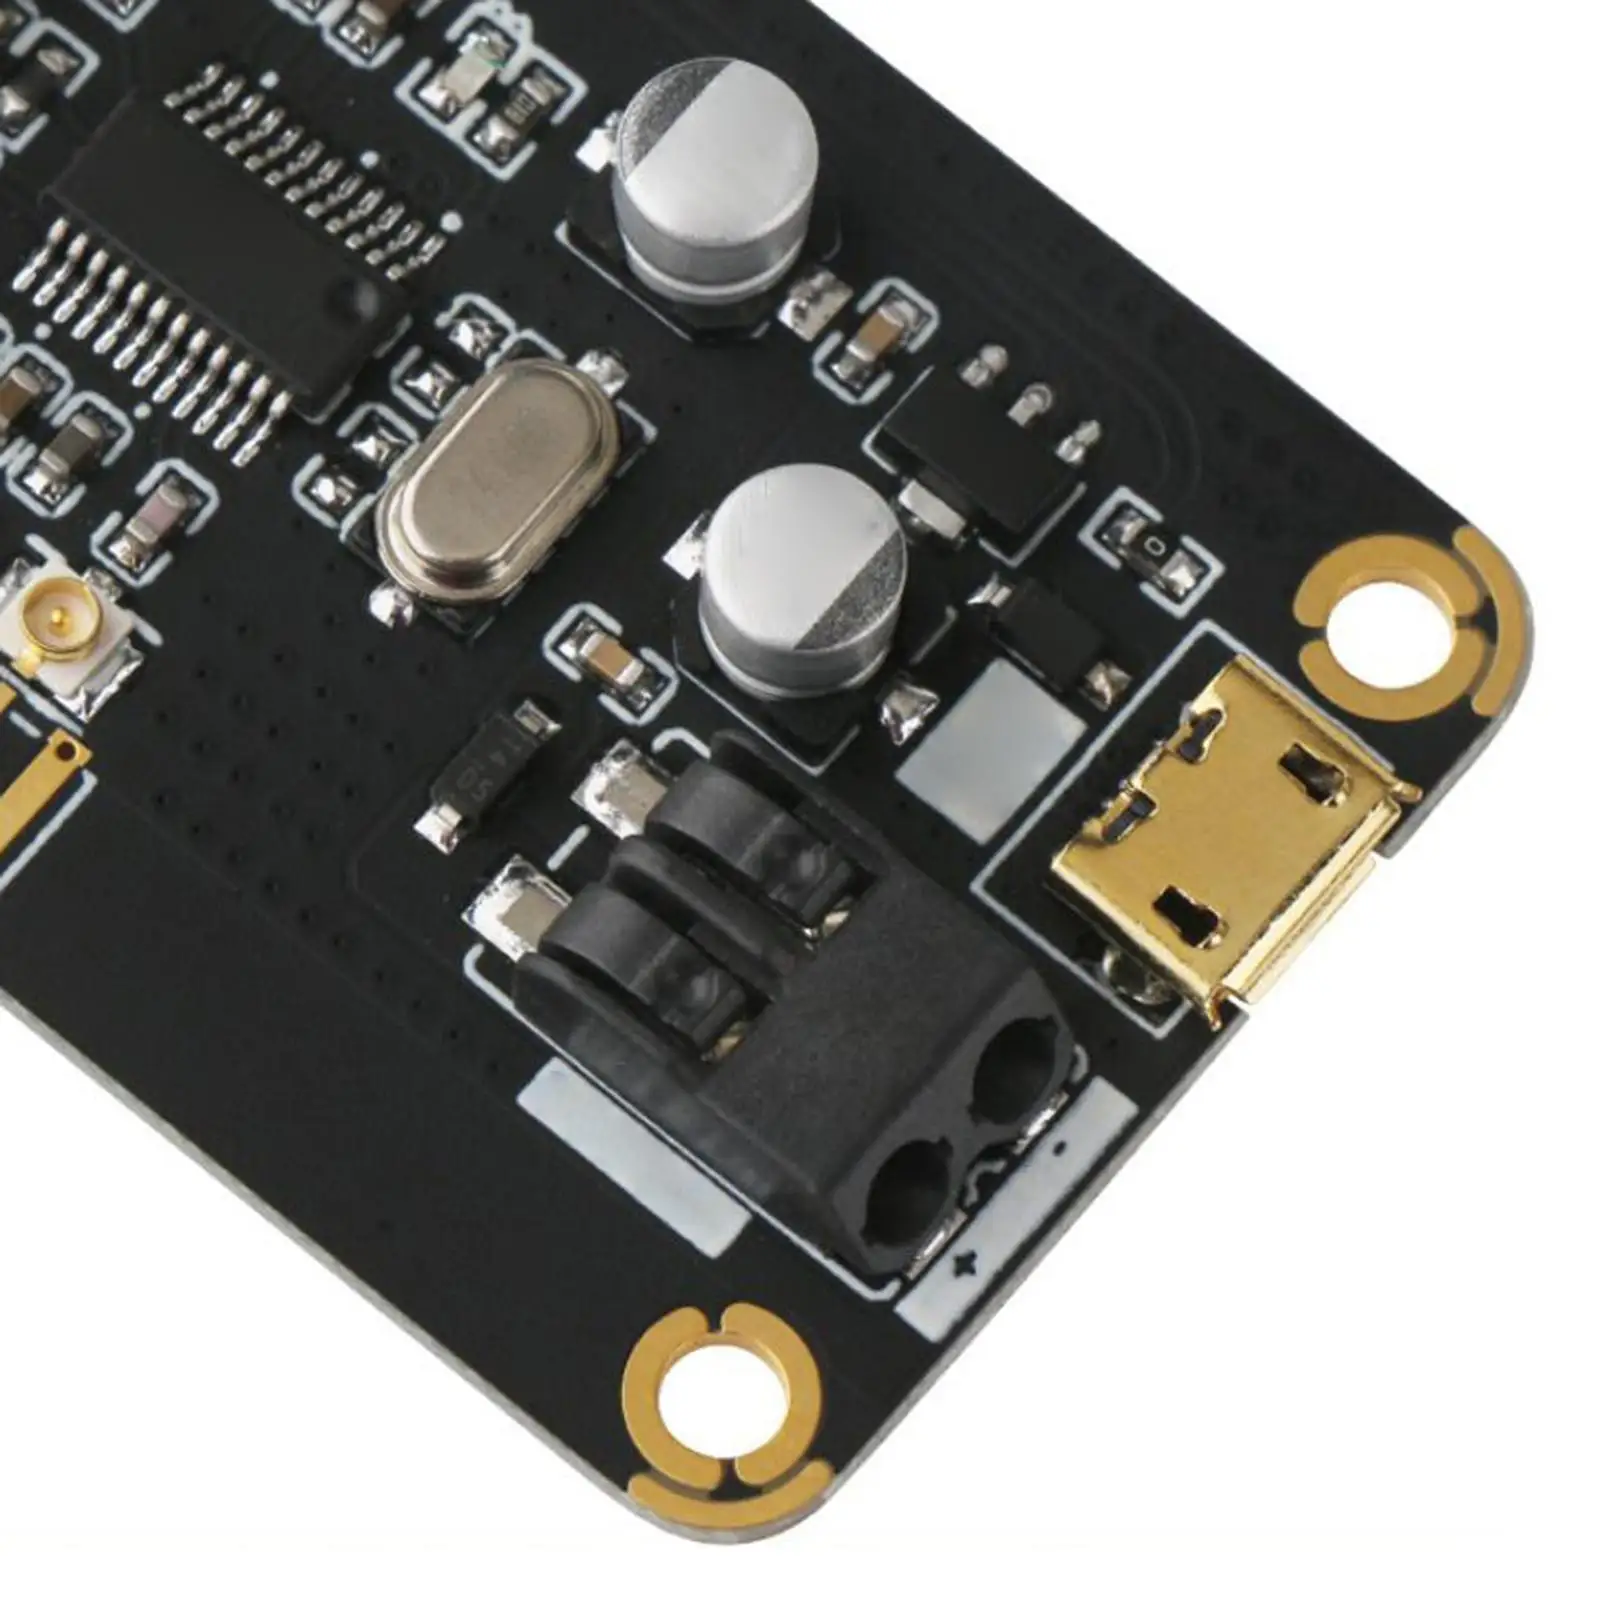 MP3 Player Decoding Board Lossless Speaker Easy Installation durable Audio Player Module Decoding